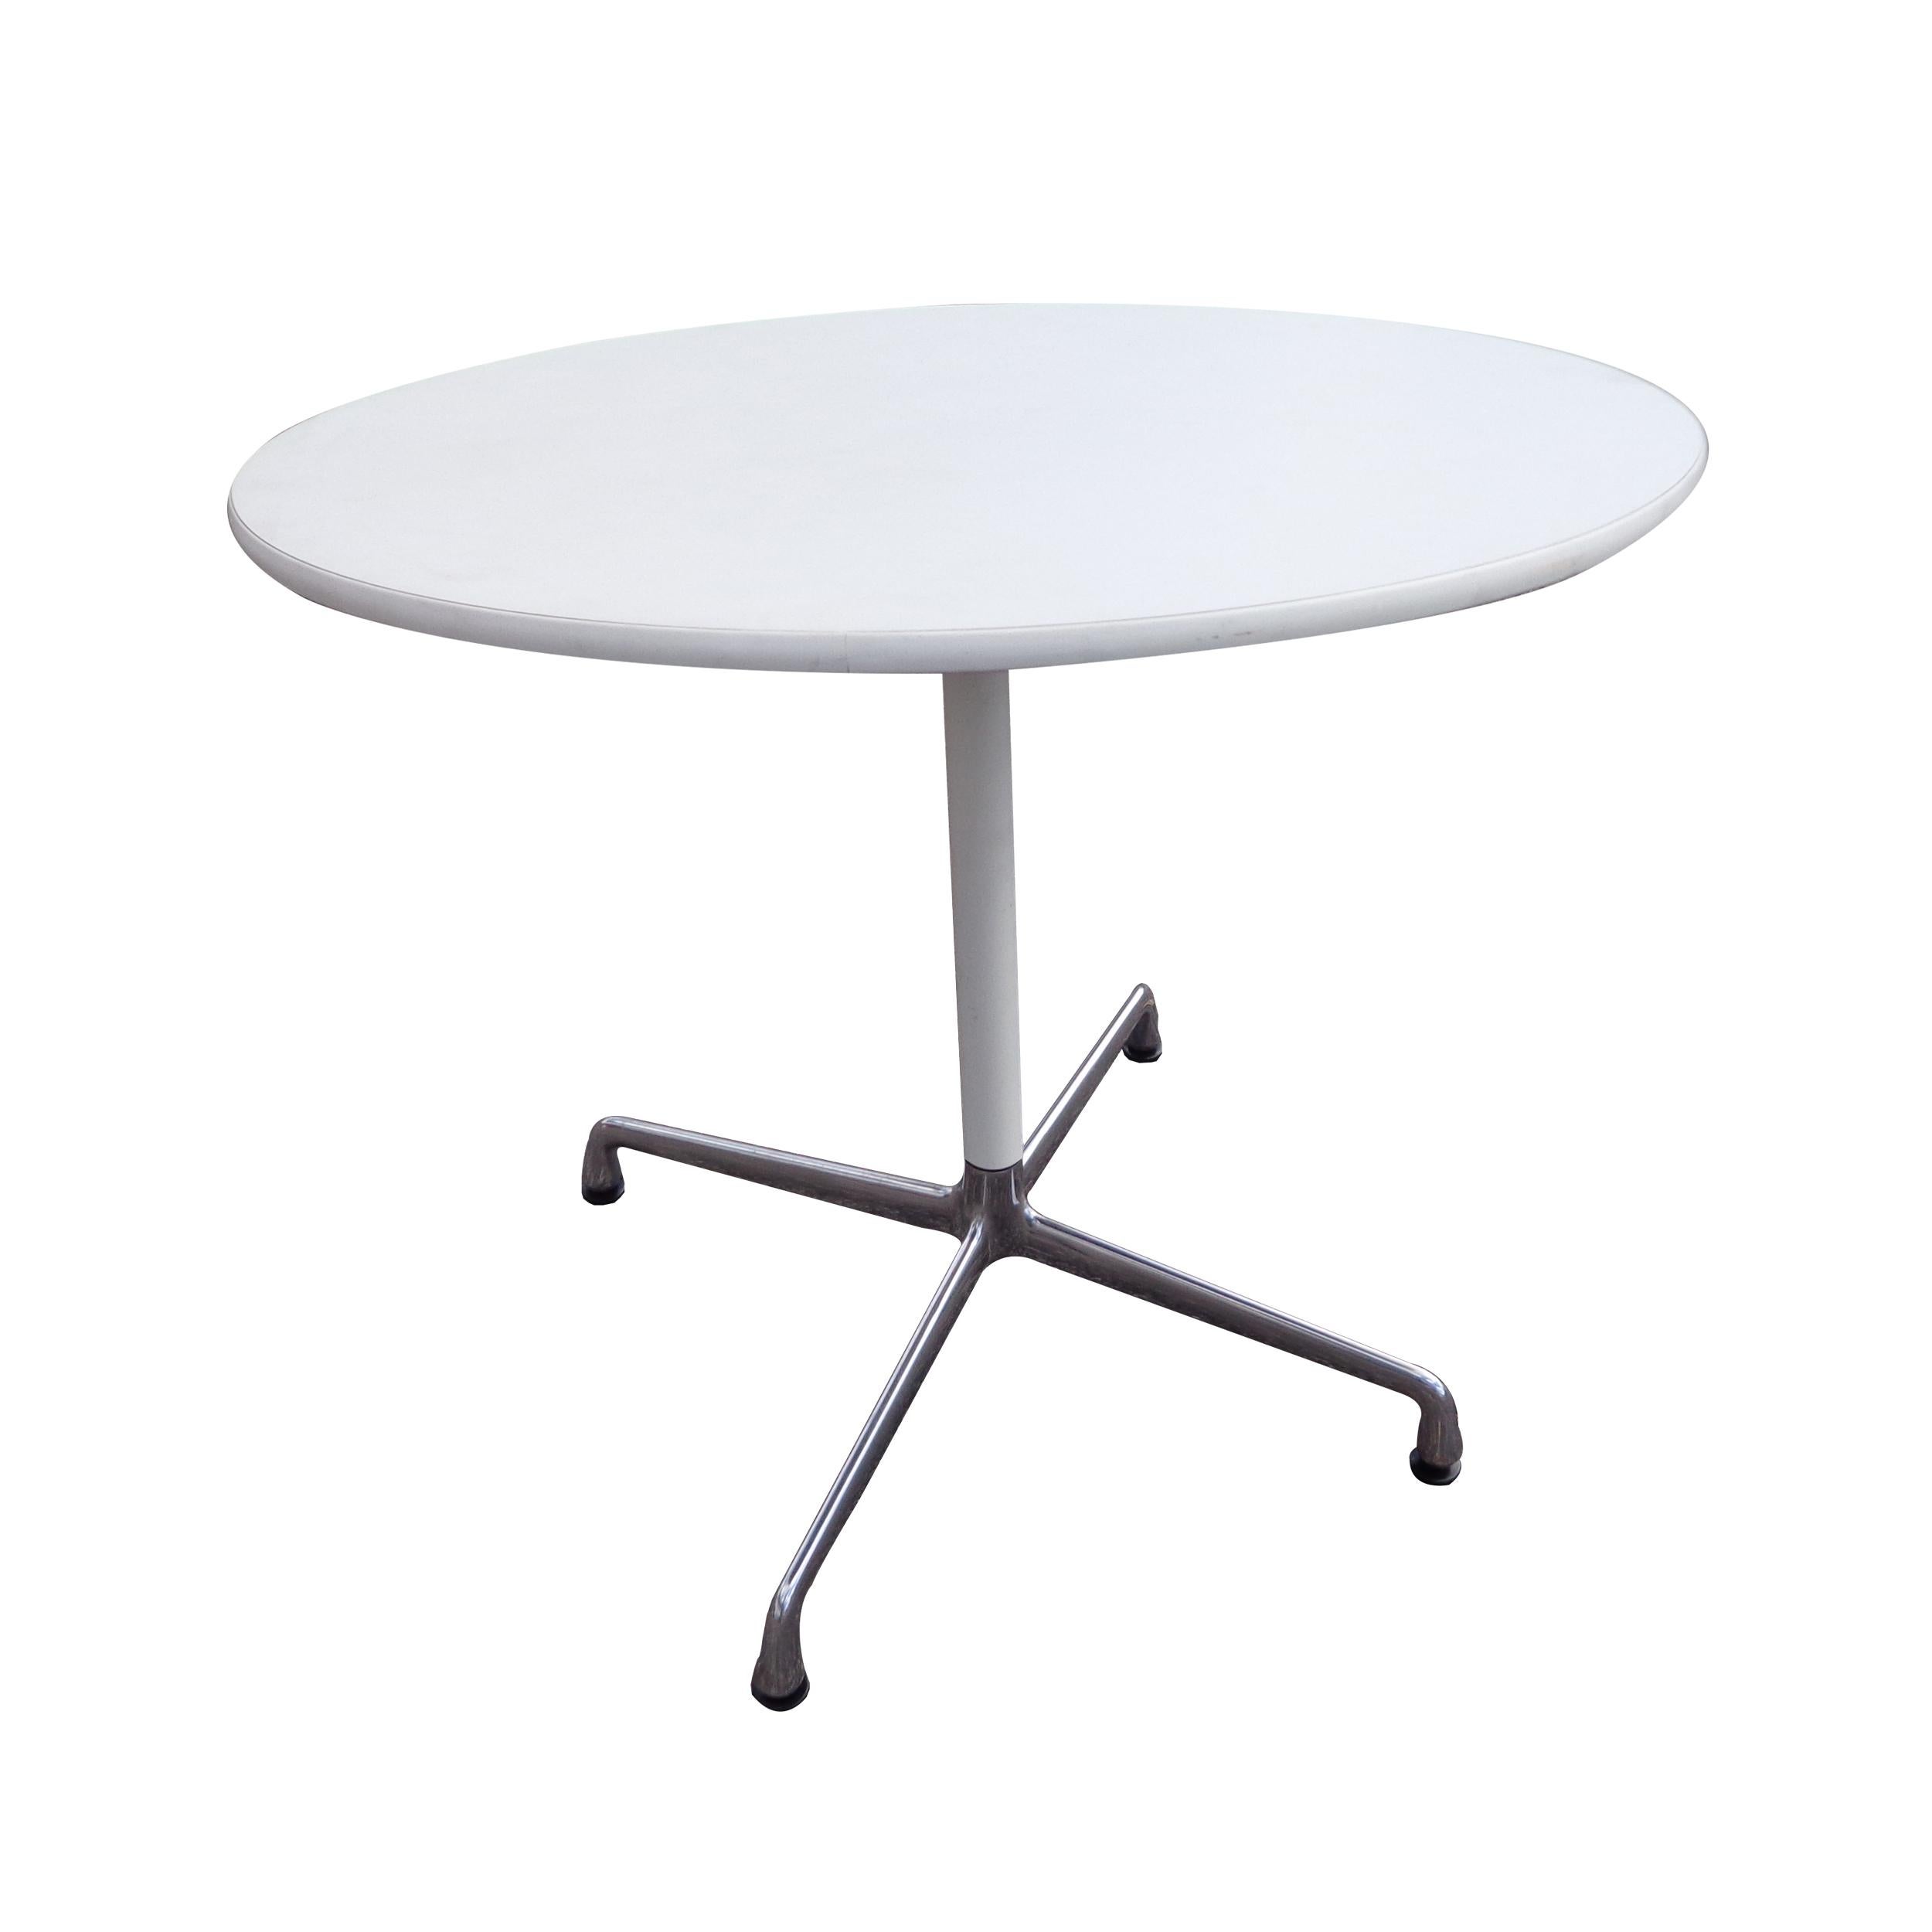 Mid-Century Modern Charles Eames for Herman Miller Dining Table For Sale